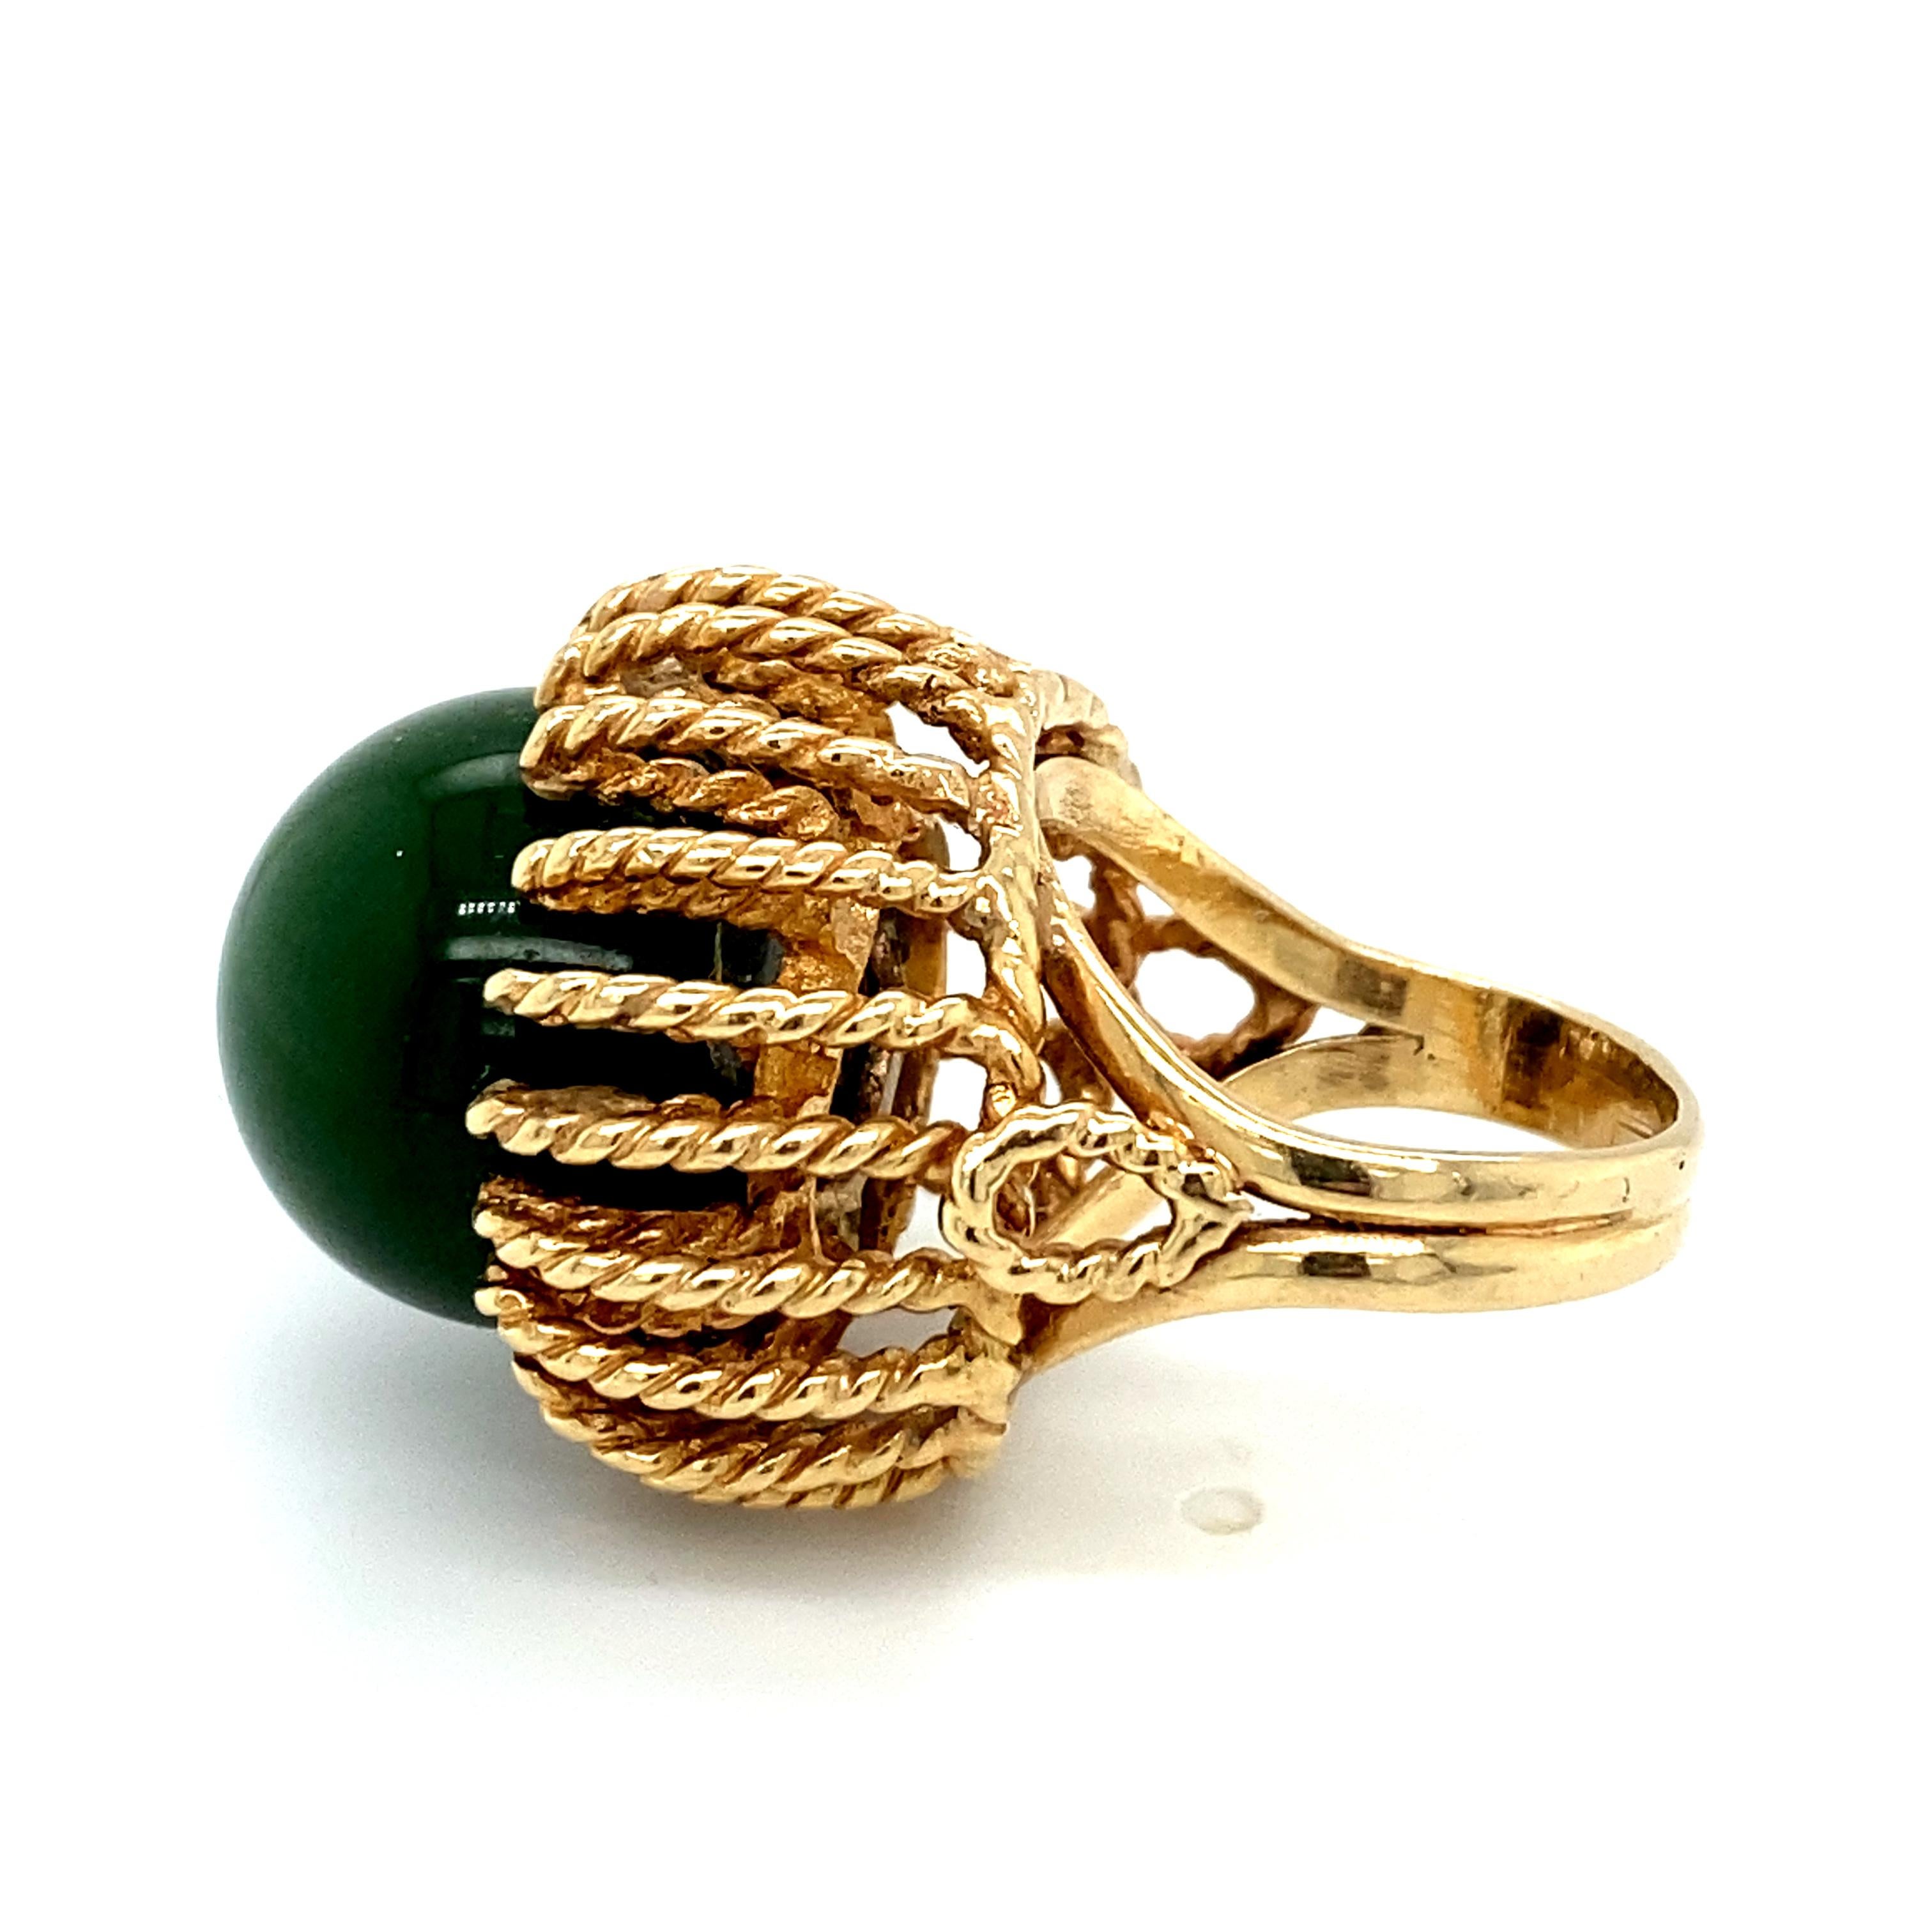 Retro Circa 1960s Green Jade Cocktail Ring in 14 Karat Yellow Gold For Sale